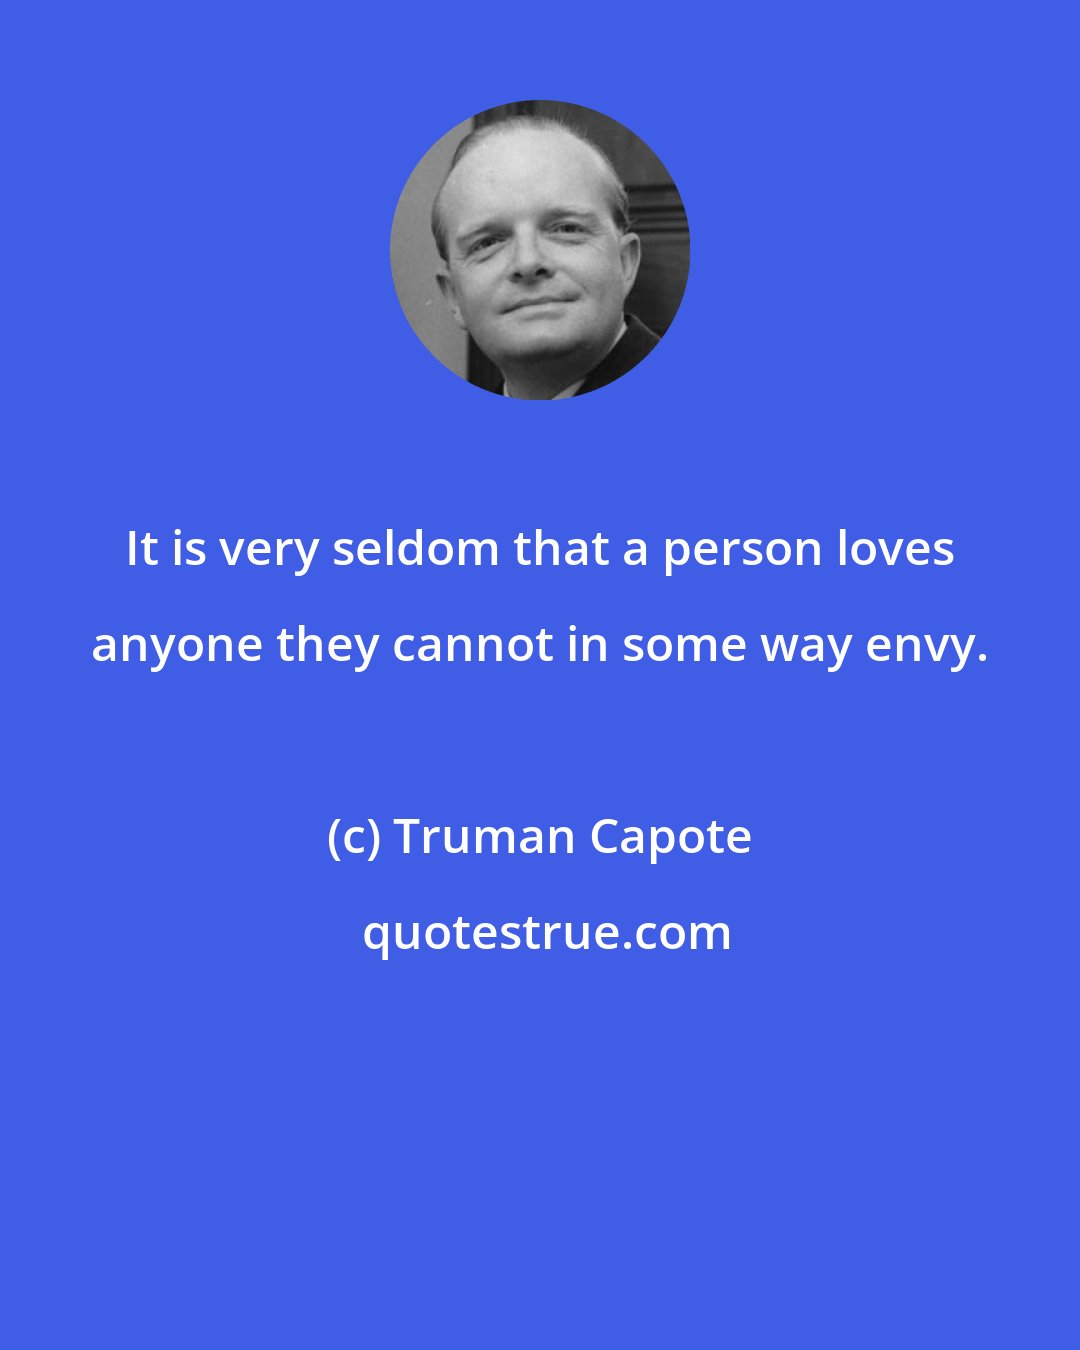 Truman Capote: It is very seldom that a person loves anyone they cannot in some way envy.